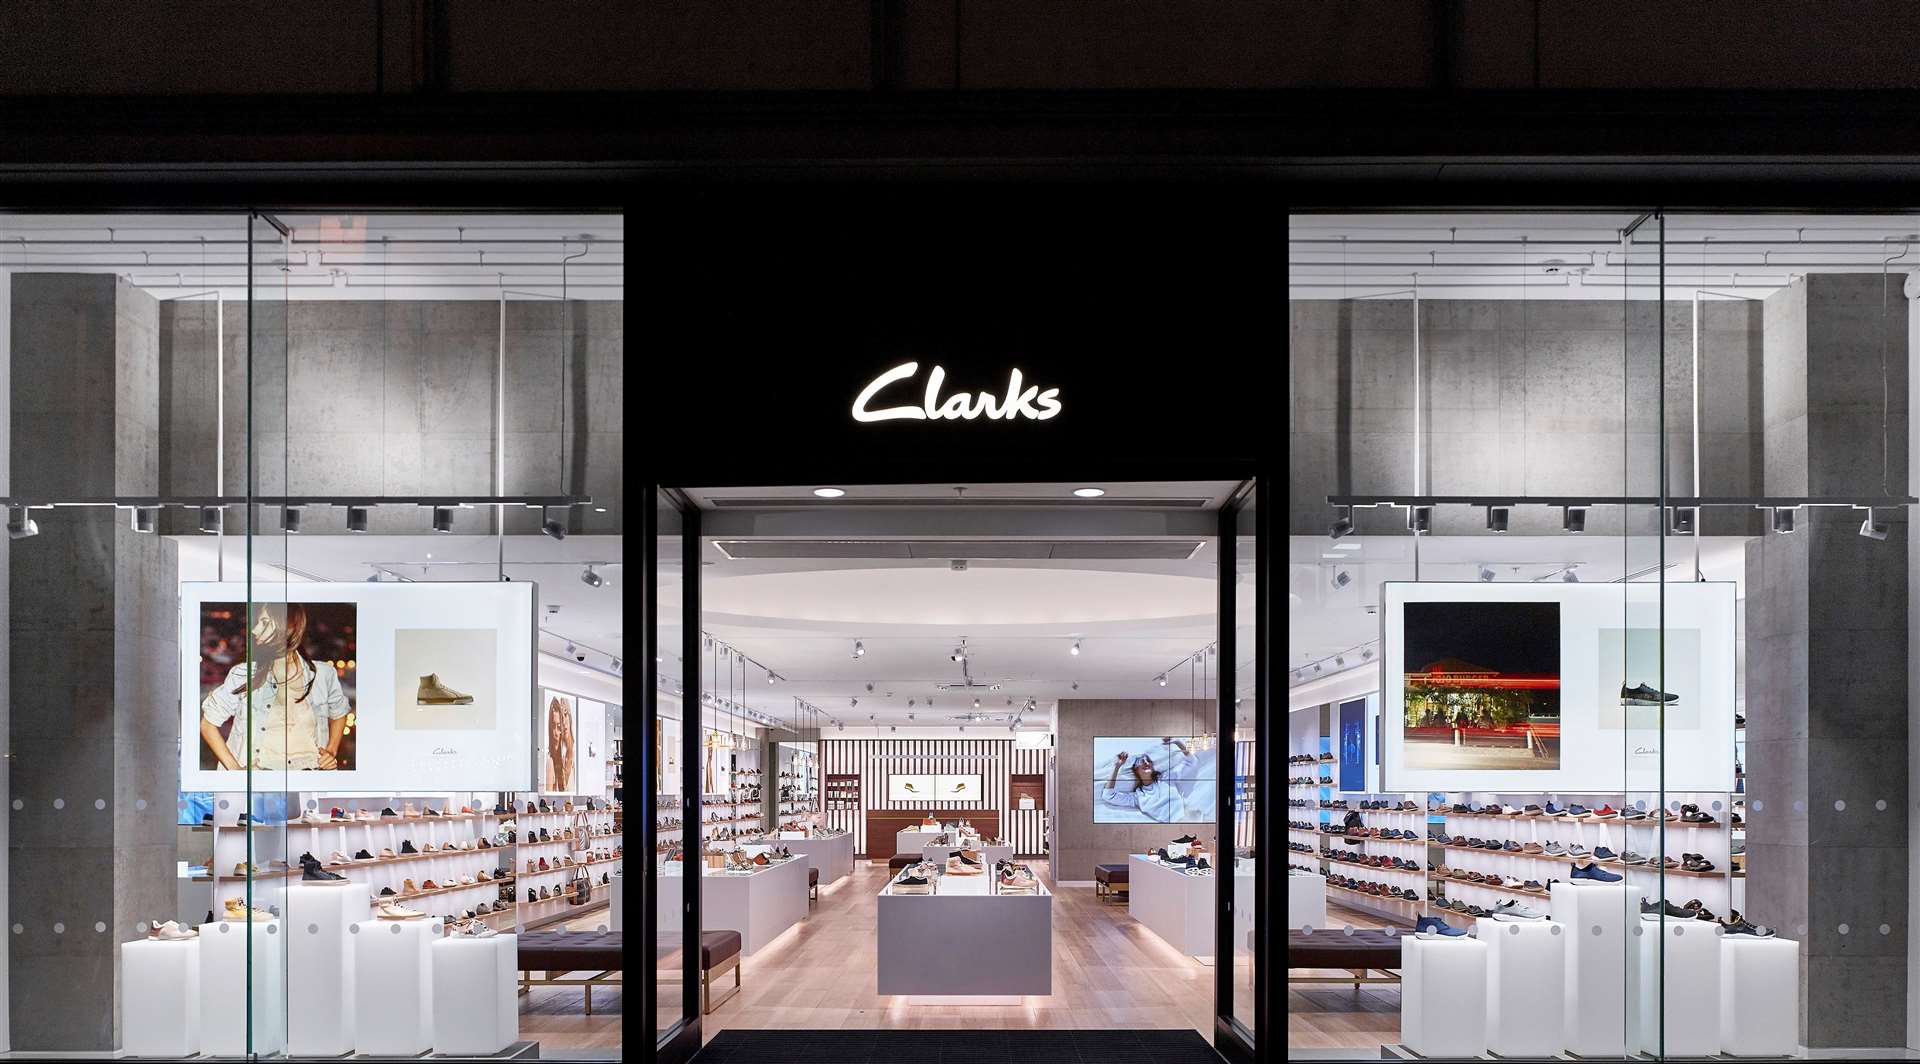 Clarks is leaving the shopping centre, too